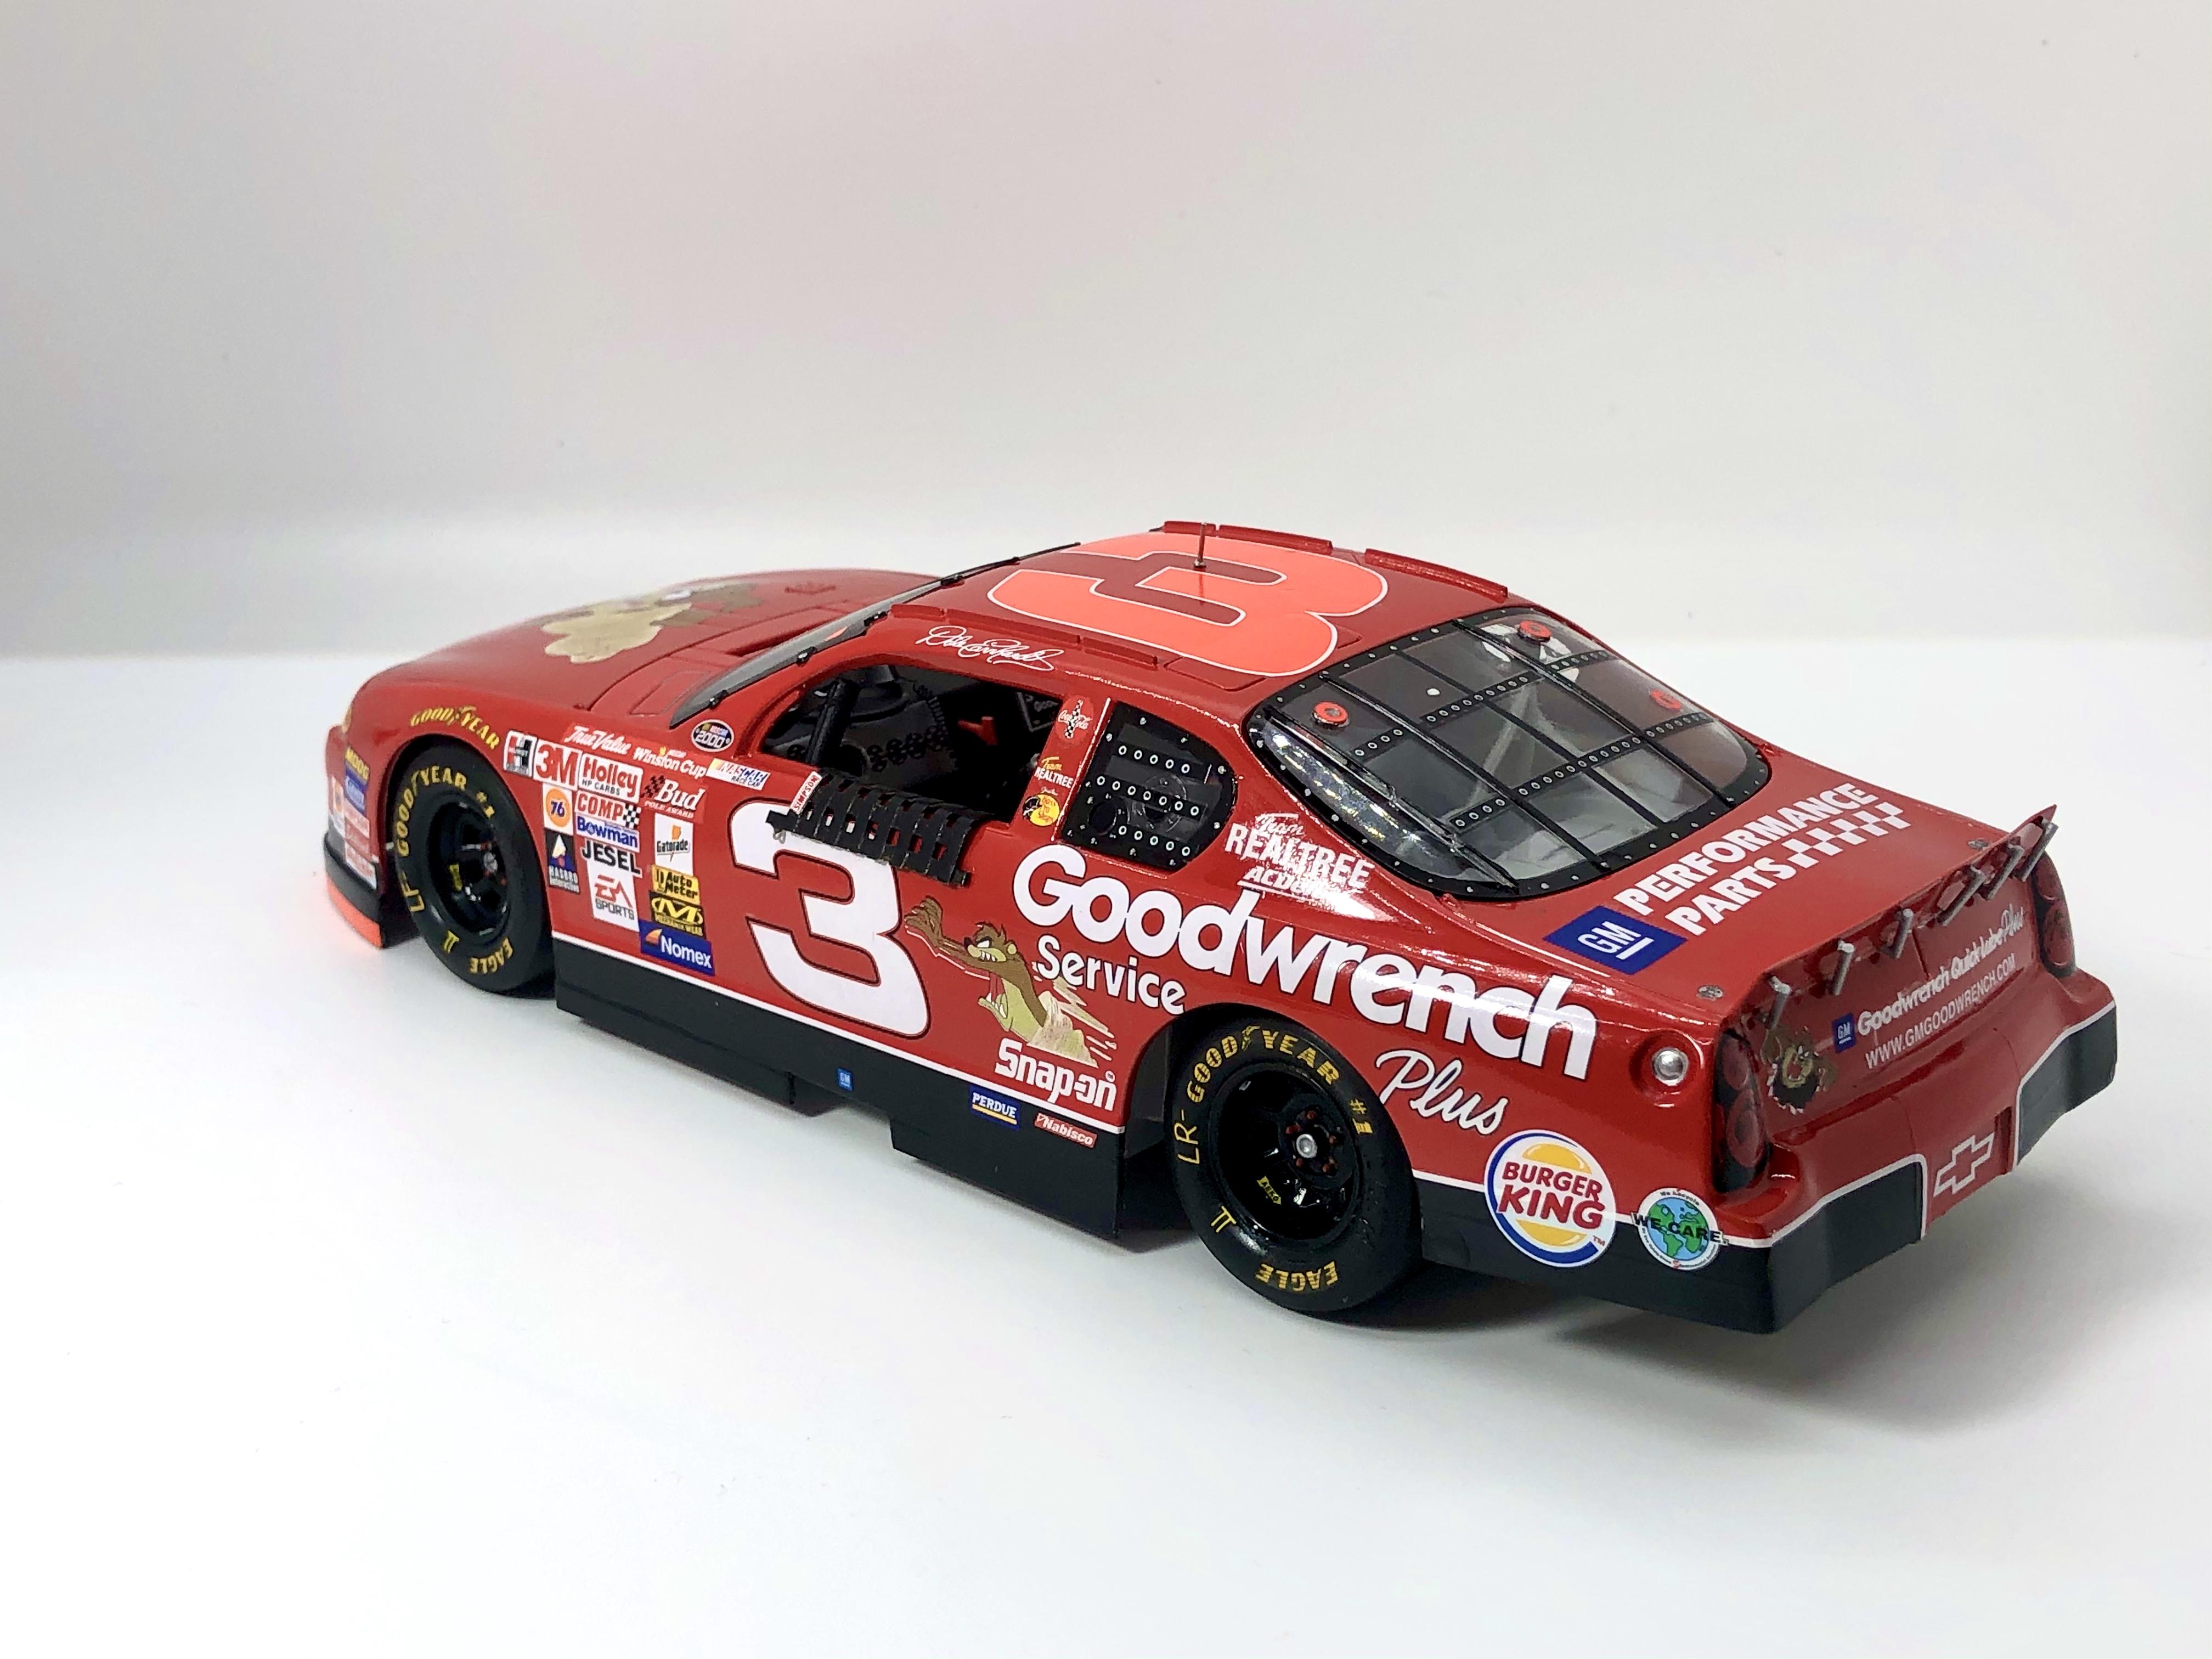 This is Dale Earnhardt Sr’s 2000 Daytona 500 Taz Goodwrench build, to quote...